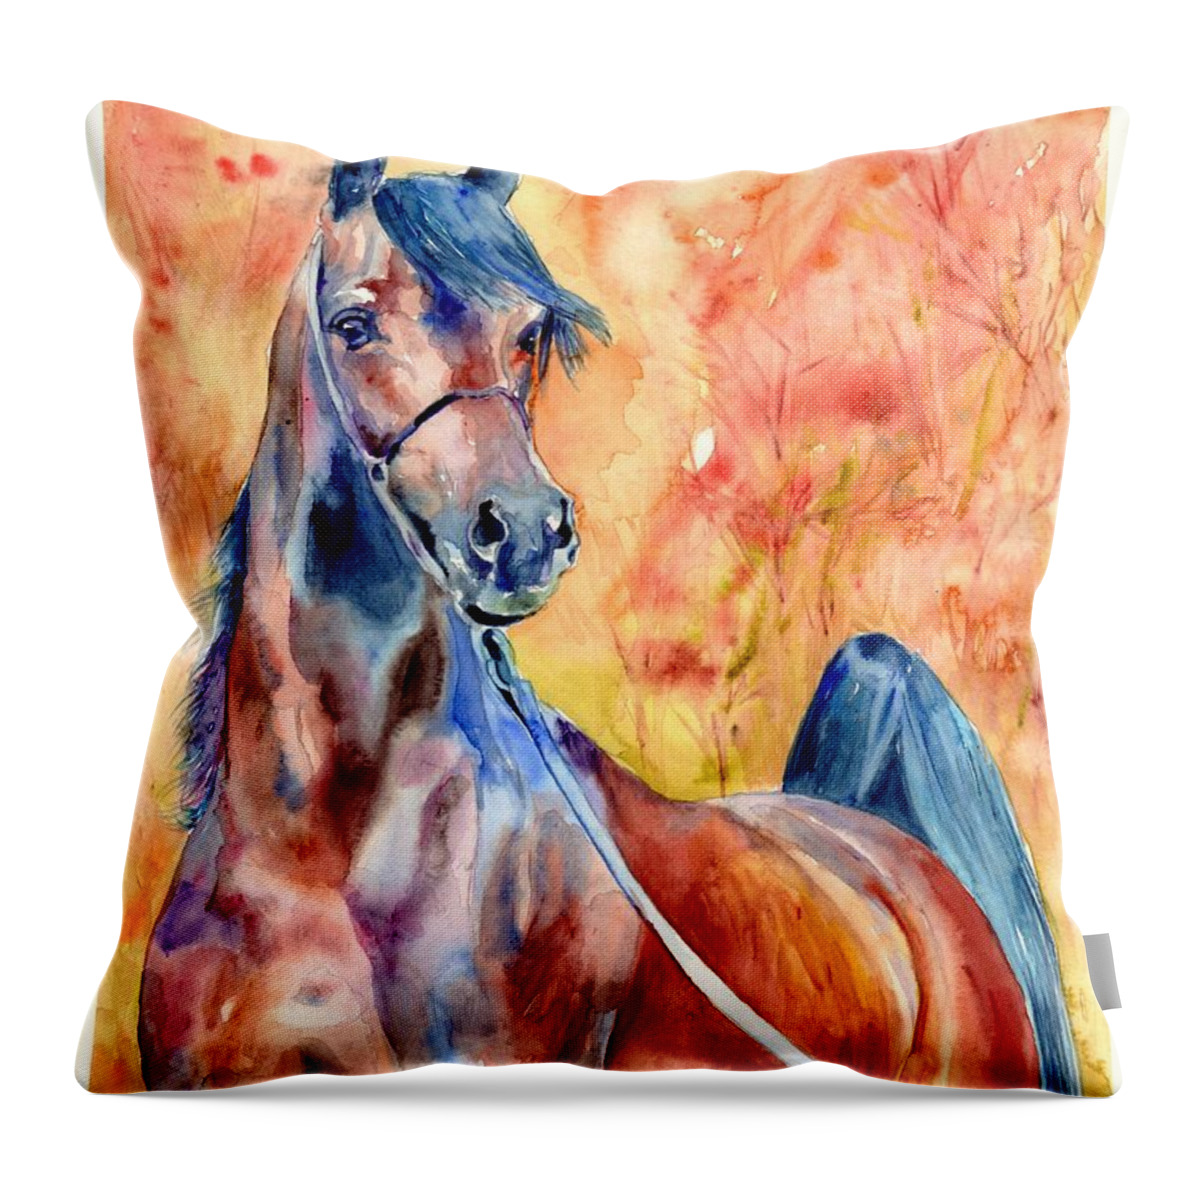 Horse Throw Pillow featuring the painting Horse On The Orange Background by Suzann Sines